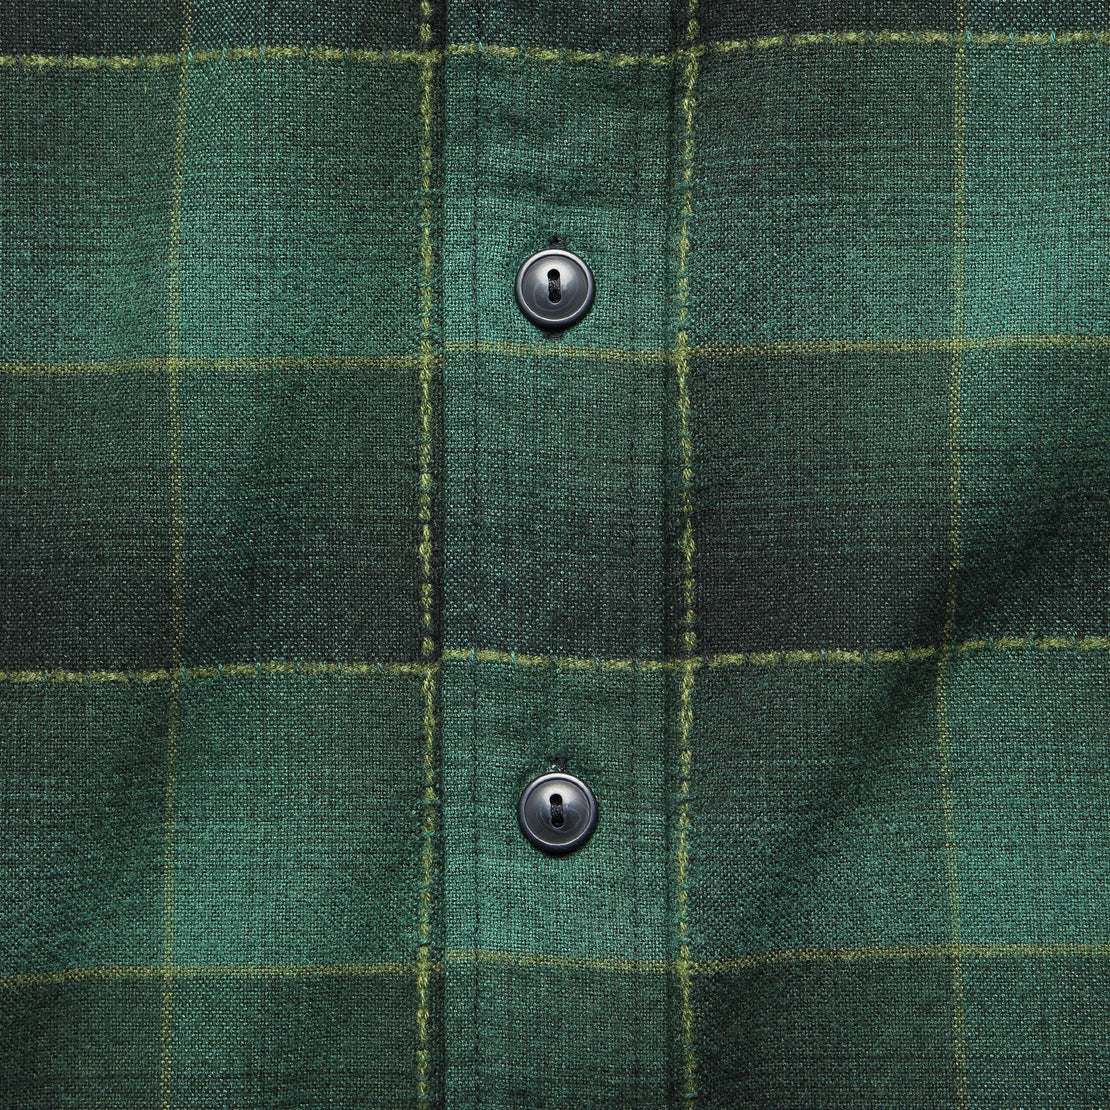 Freeport Workshirt - Green/Black - RRL - STAG Provisions - Tops - L/S Woven - Other Pattern